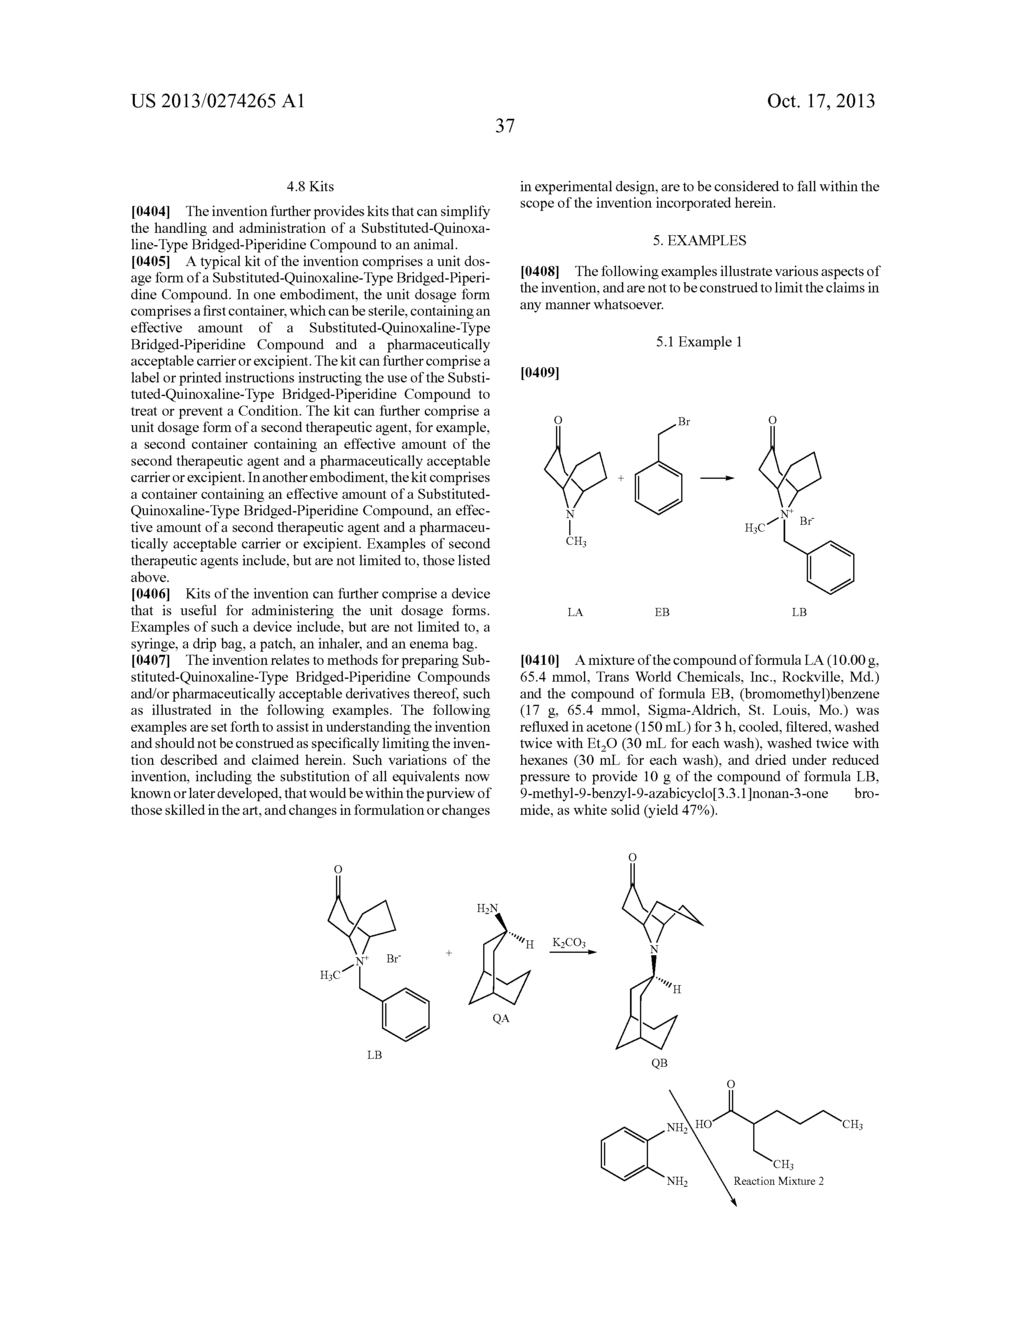 SUBSTITUTED-QUINOXALINE-TYPE BRIDGED-PIPERIDINE COMPOUNDS AND THE USES     THEREOF - diagram, schematic, and image 38